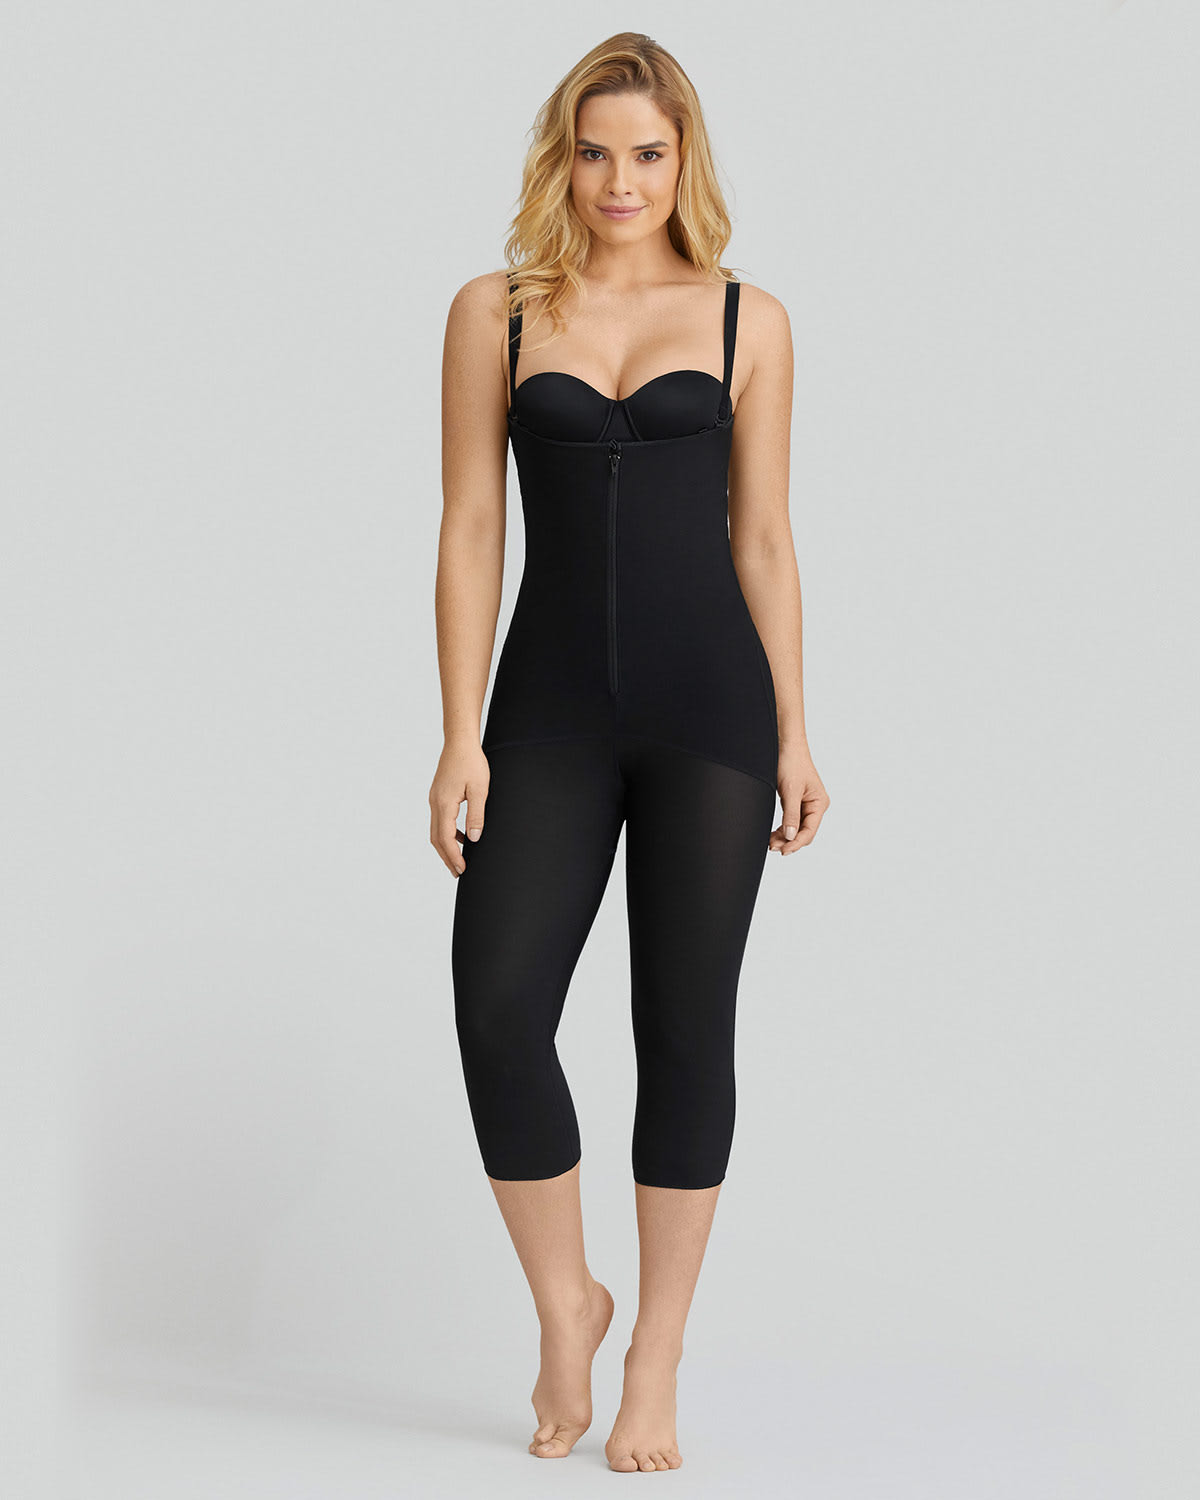  Leonisa Sculpting Body Shaper with Built-In Back